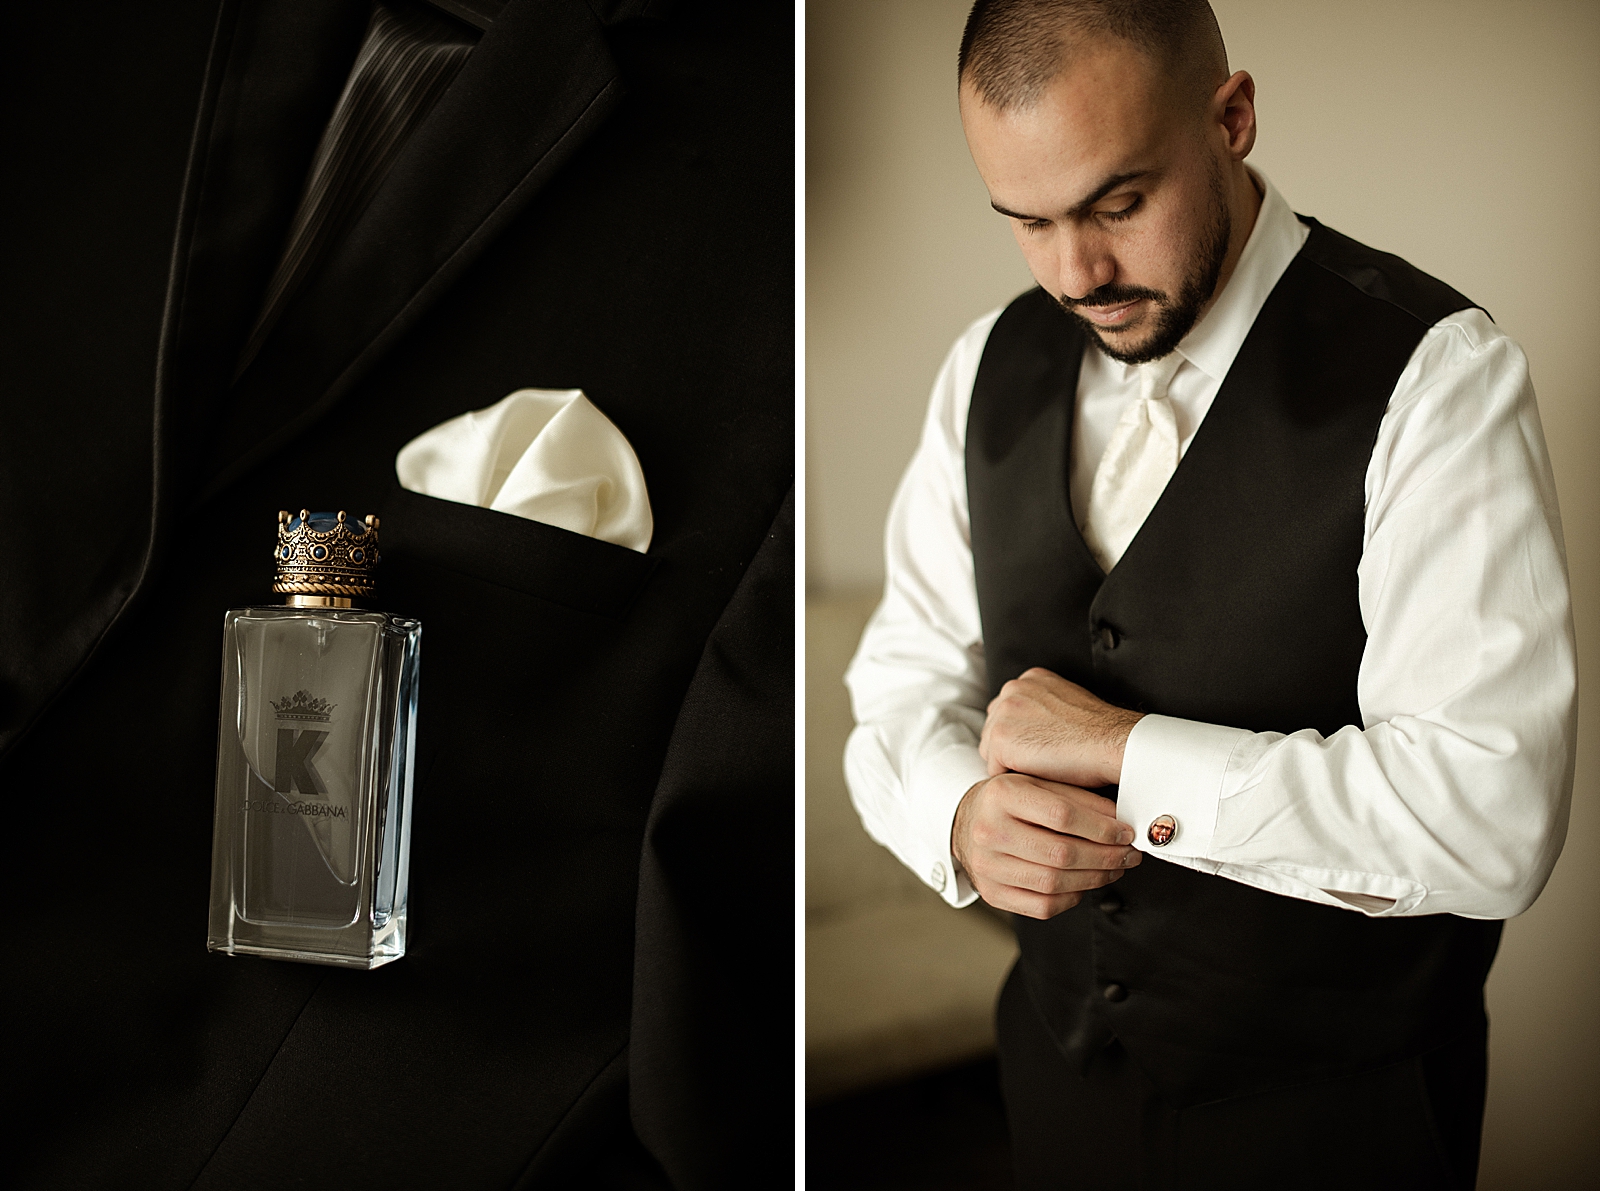 Groom adjusting cuffs and cologne